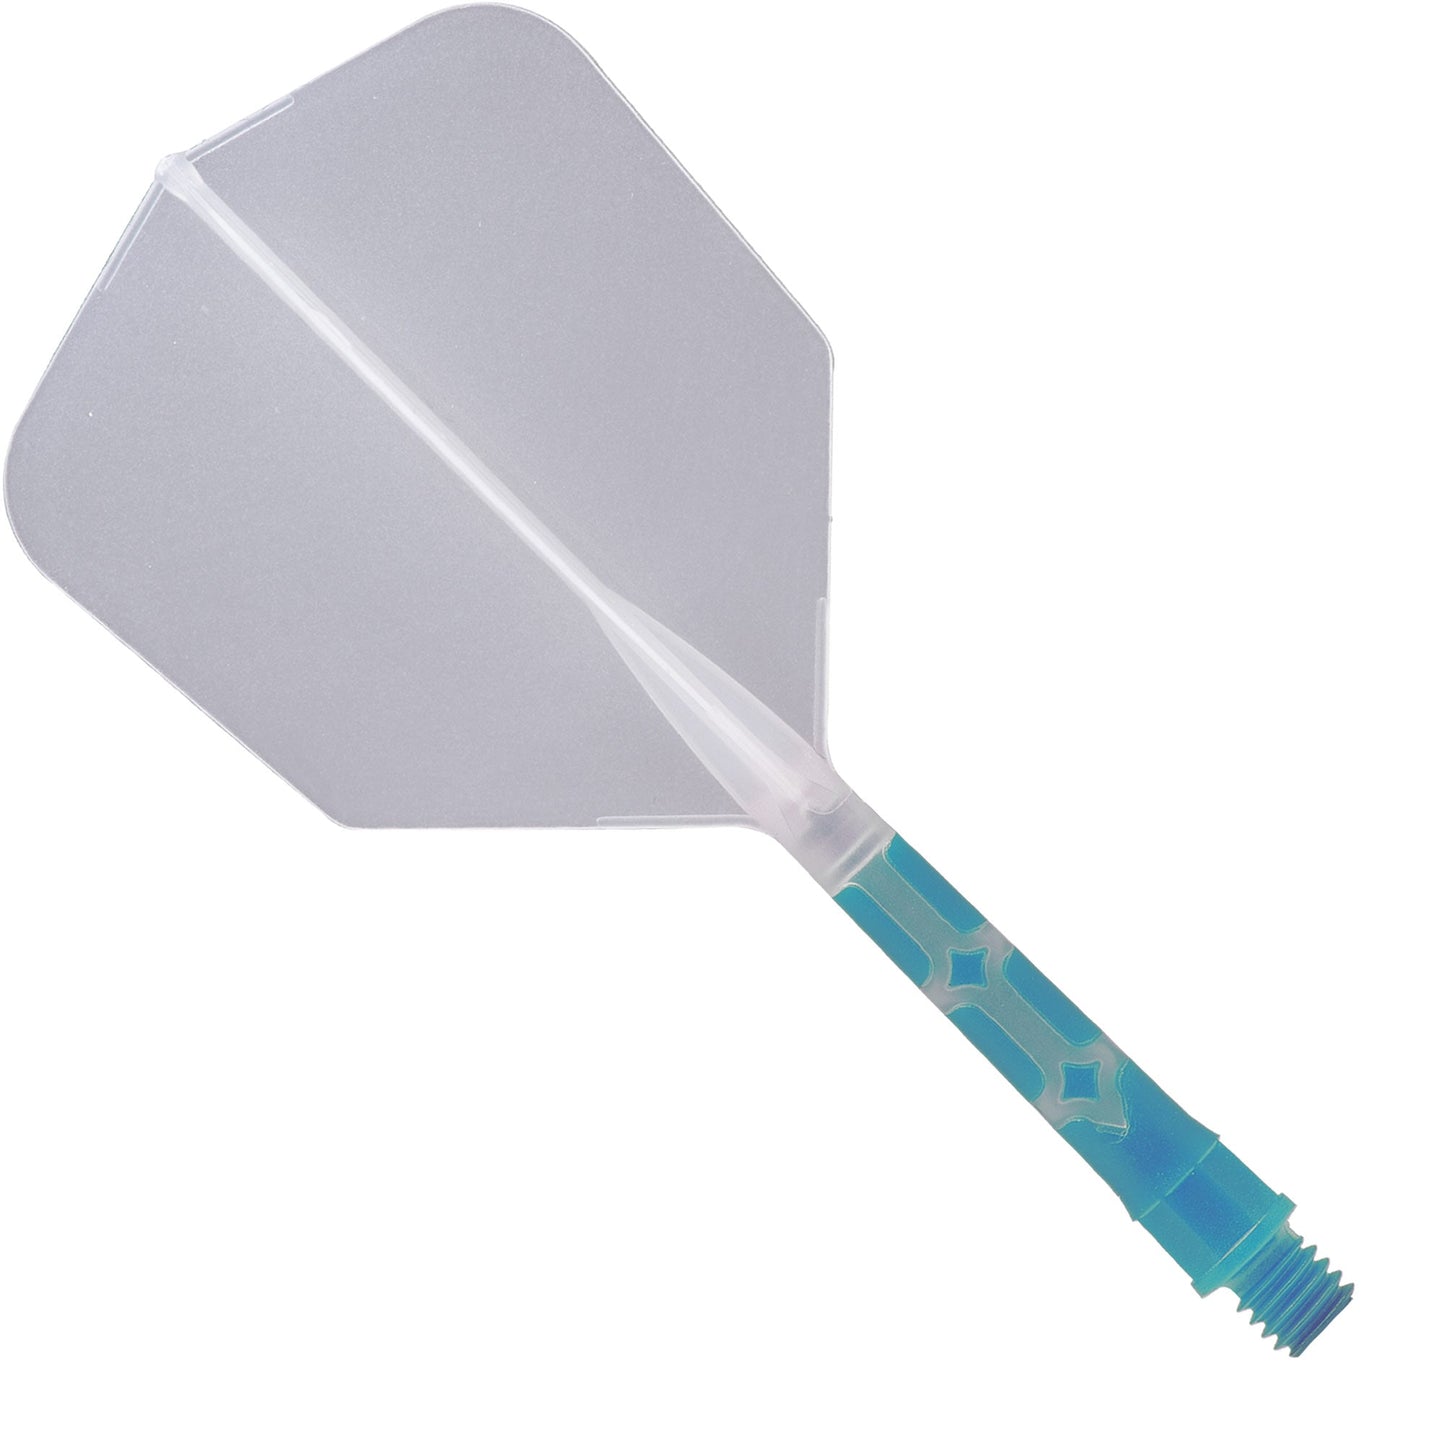 Cuesoul Rost T19 Integrated Dart Shaft and Flights - Big Wing - Sky Blue with Clear Flight Medium